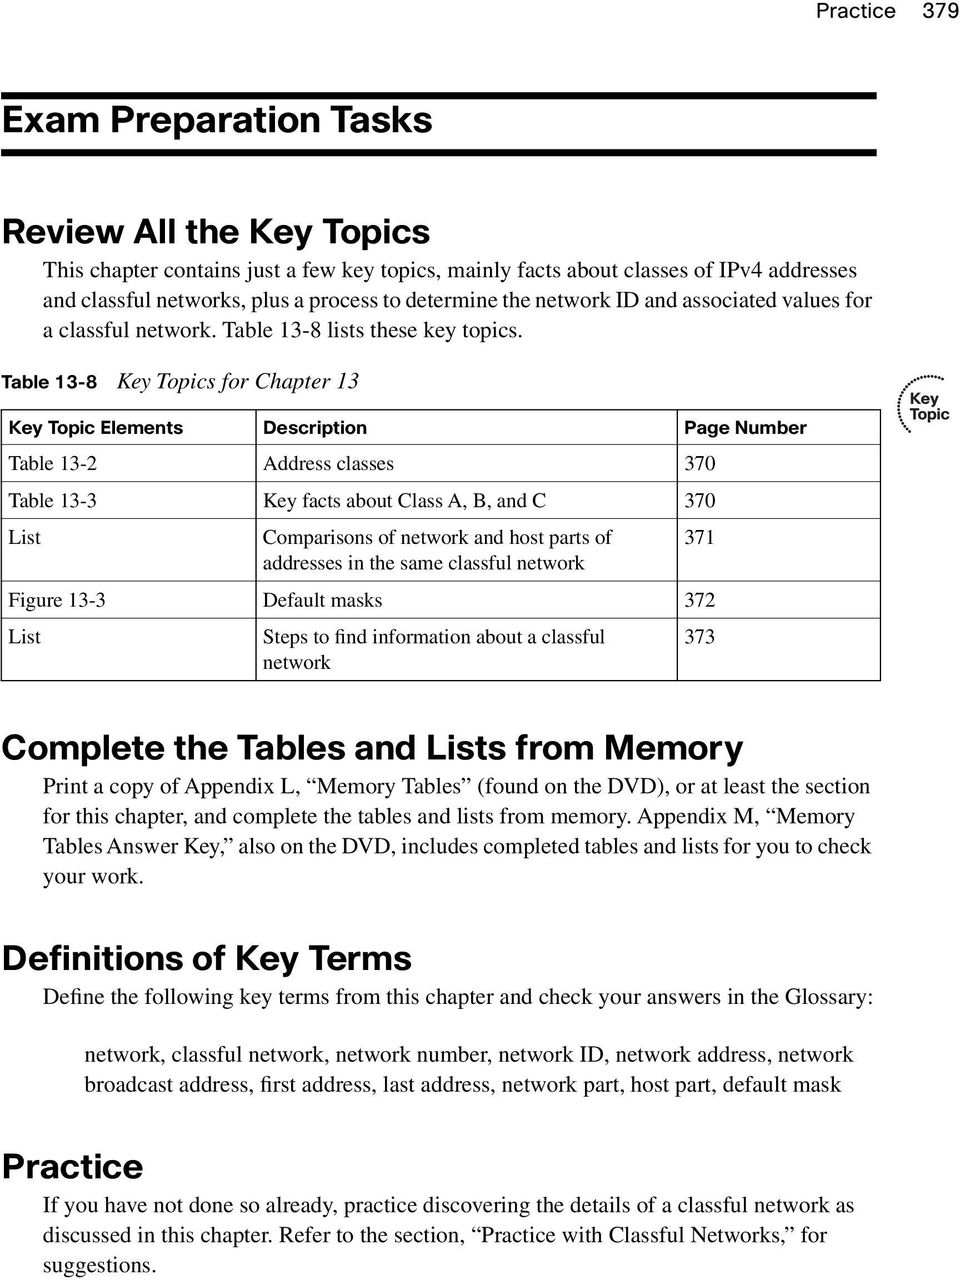 Table 13-8 Key Topics for Chapter 13 Key Topic Elements Description Page Number Table 13-2 Address classes 370 Table 13-3 Key facts about Class A, B, and C 370 List Comparisons of network and host